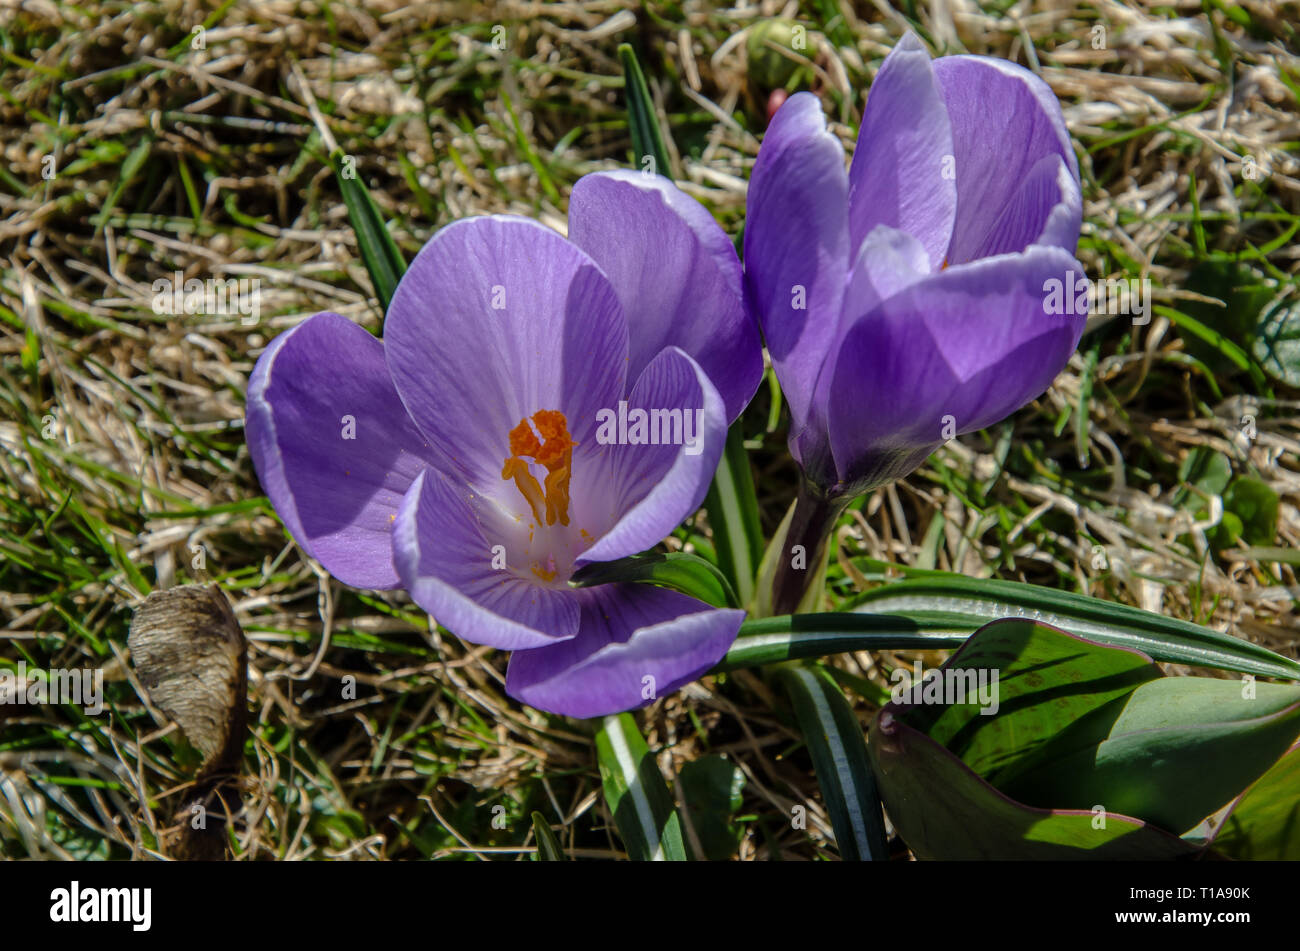 Crocus a genus of flowering plants in the iris family comprising 90 species of perennials growing from corms. Many are cultivated for their flowers. Stock Photo